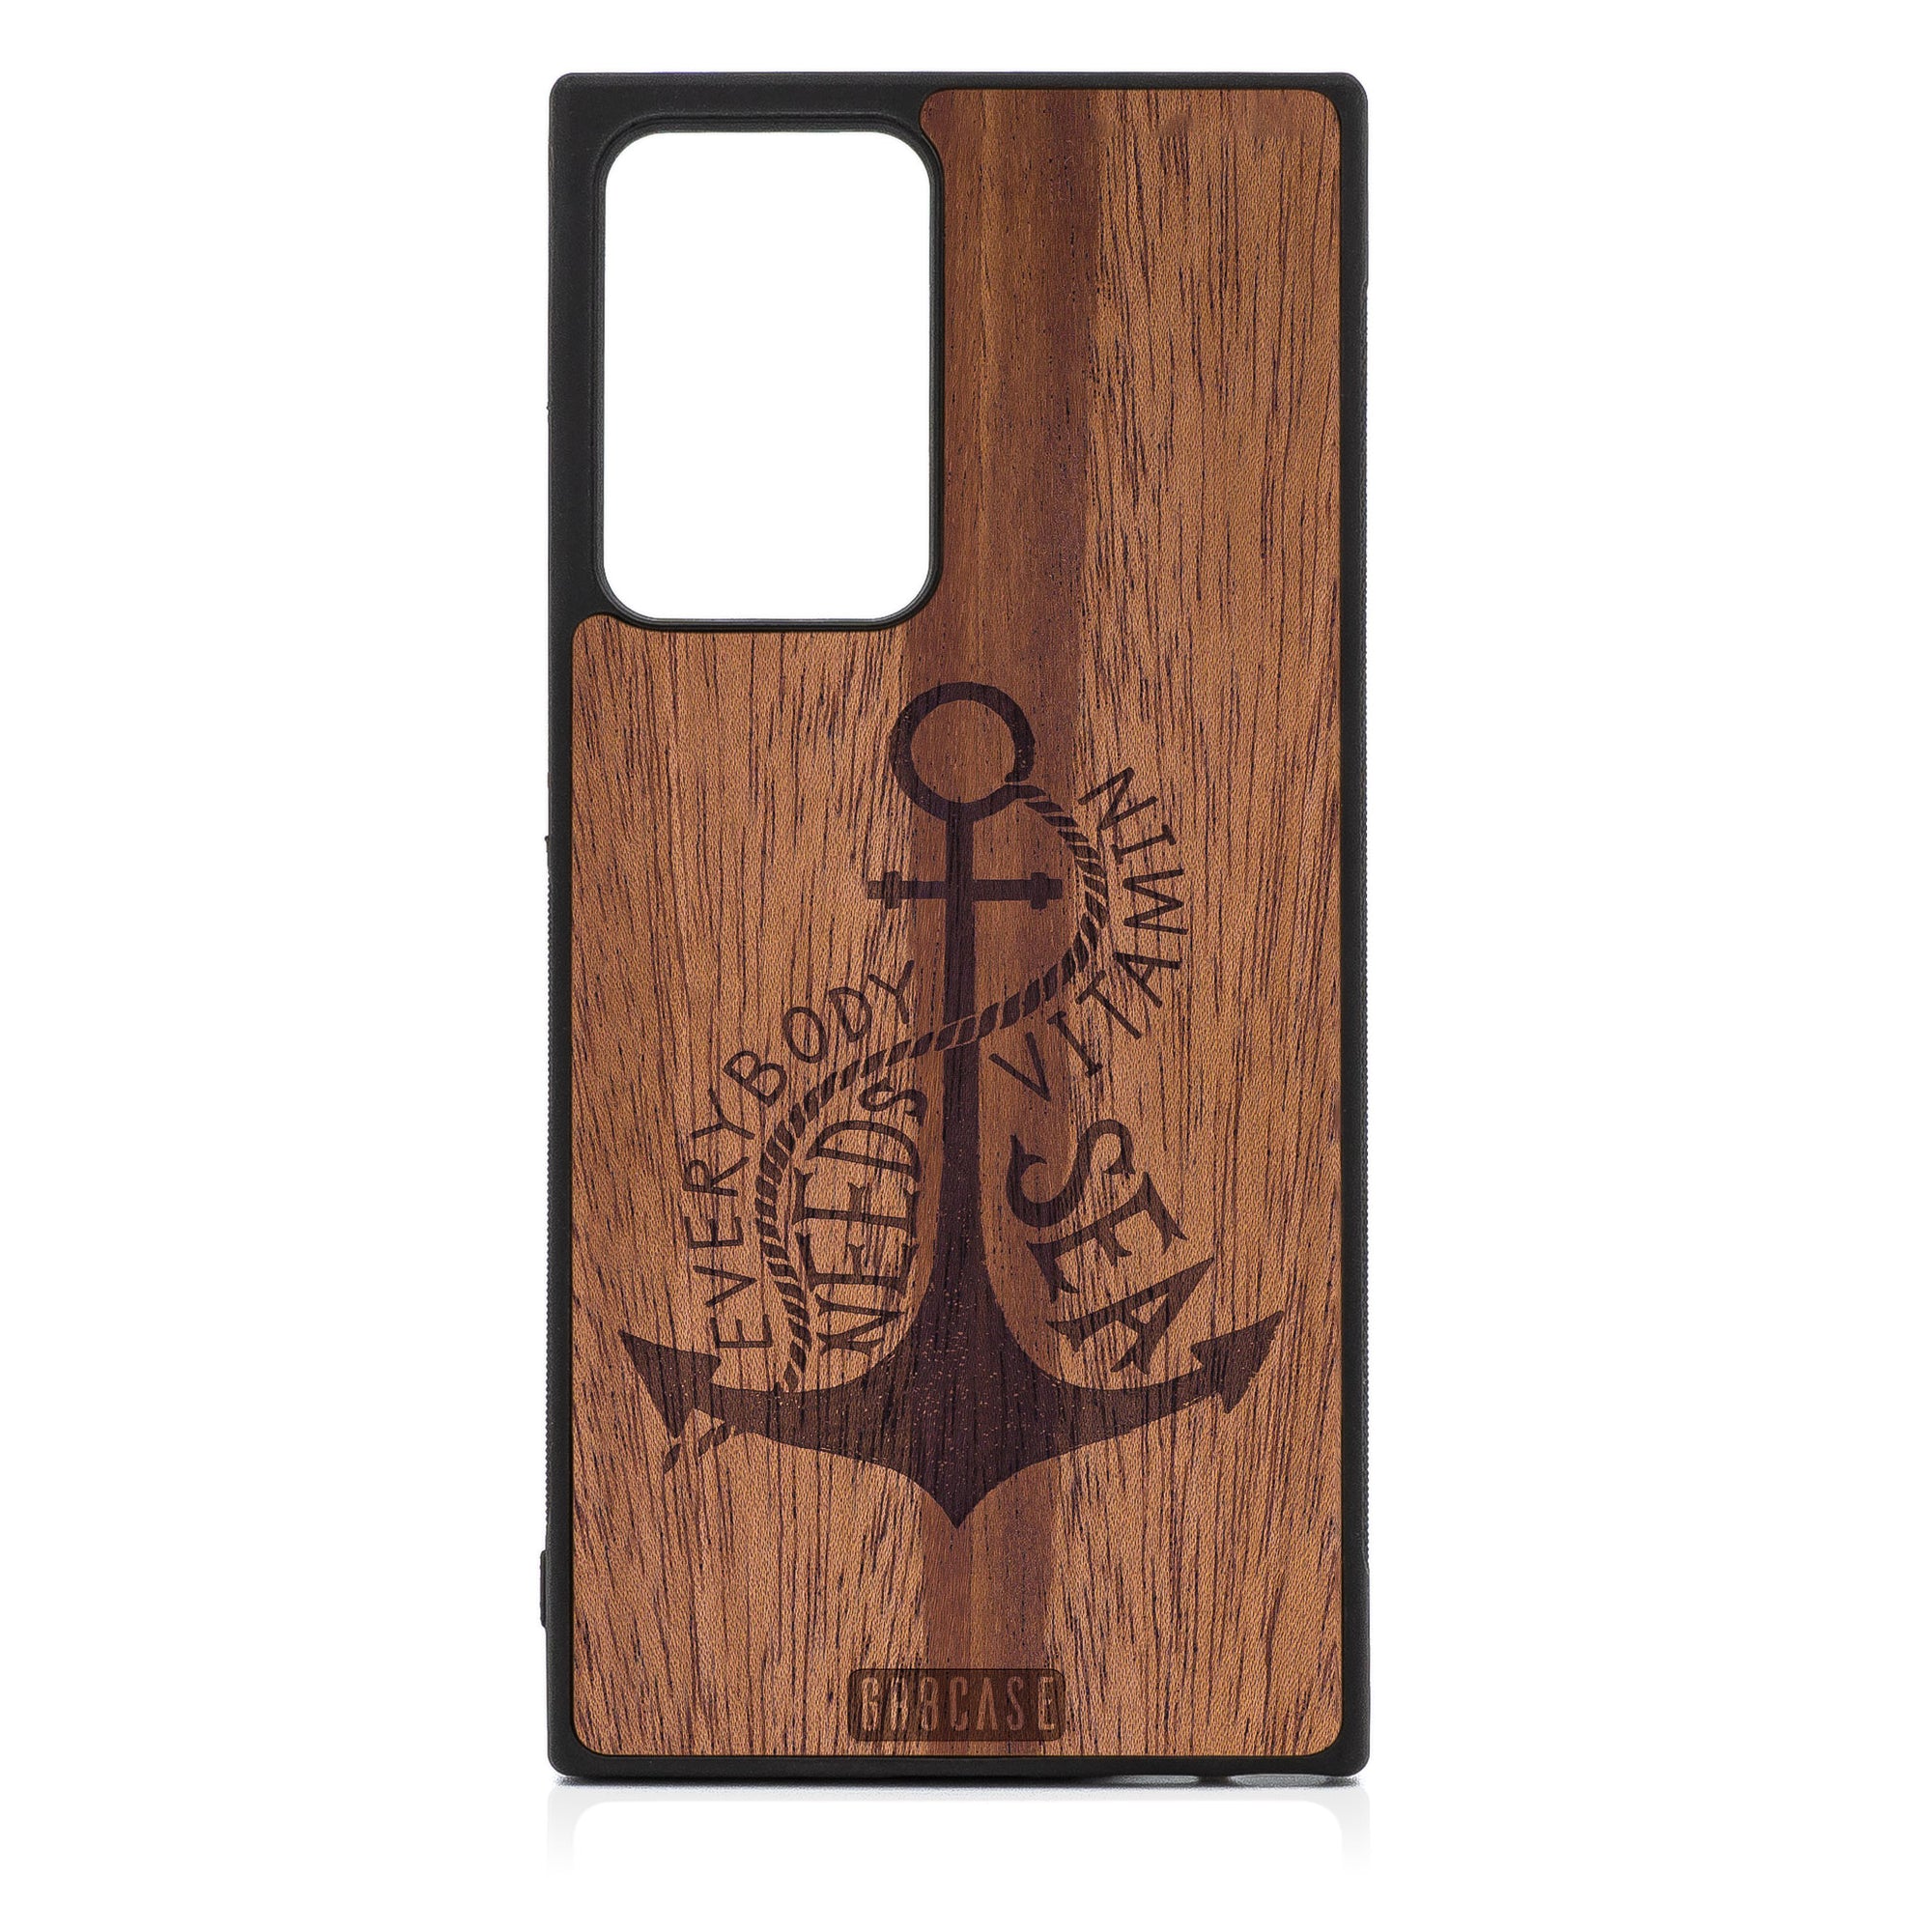 Everybody Needs Vitamin Sea (Anchor) Design Wood Case For Samsung Galaxy Note 20 Ultra